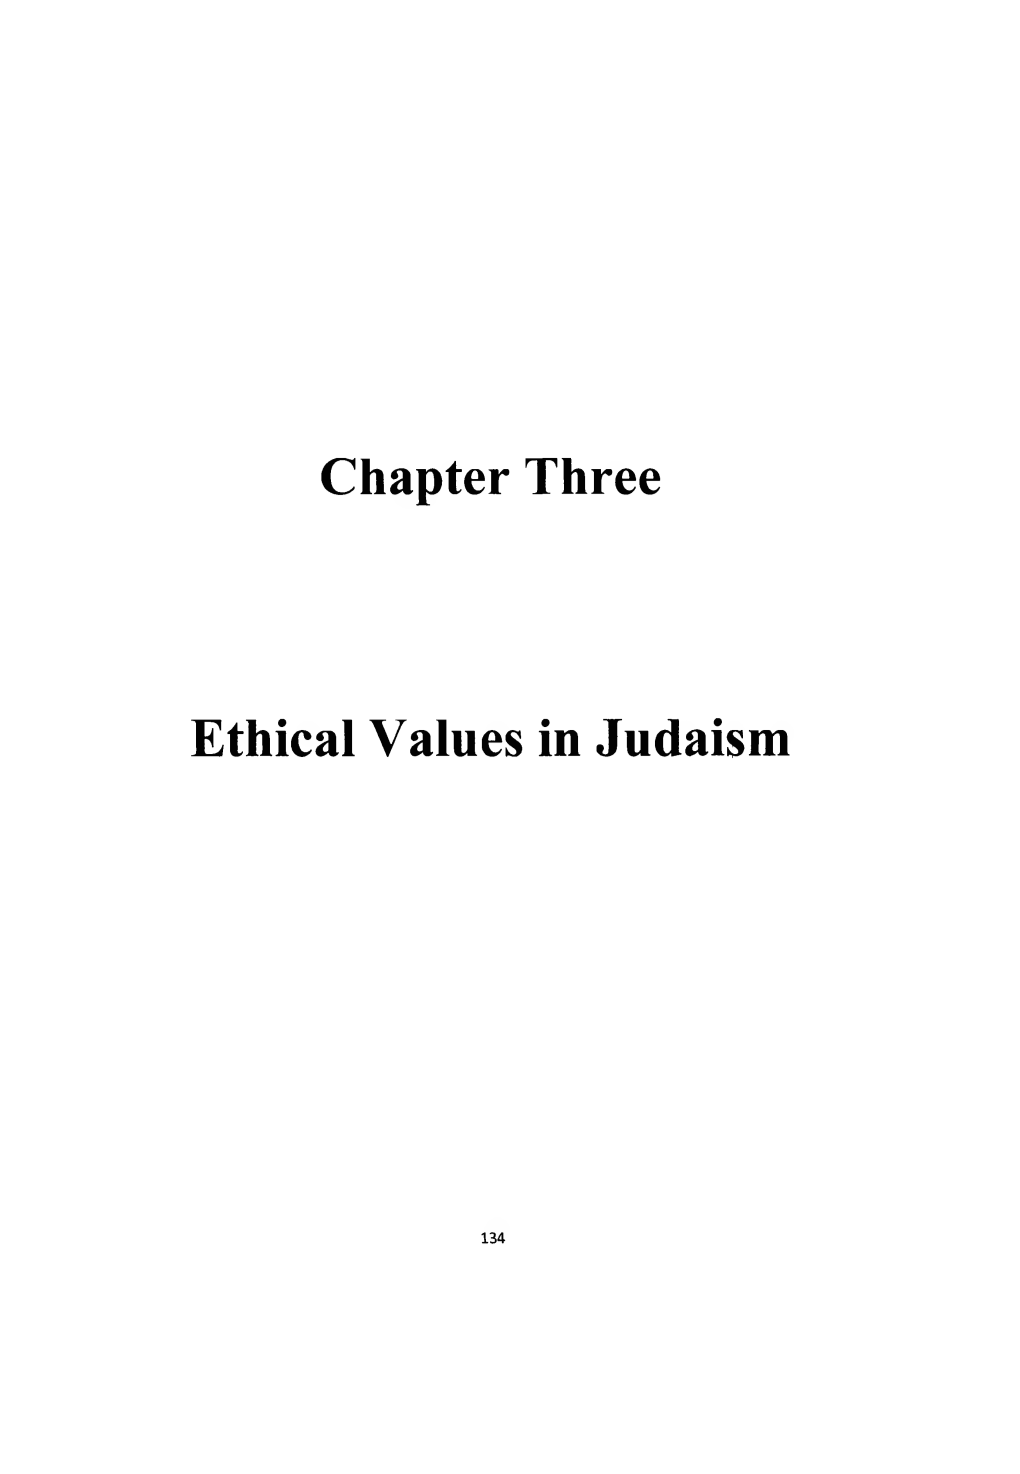 Chapter Three Ethical Values in Judaism